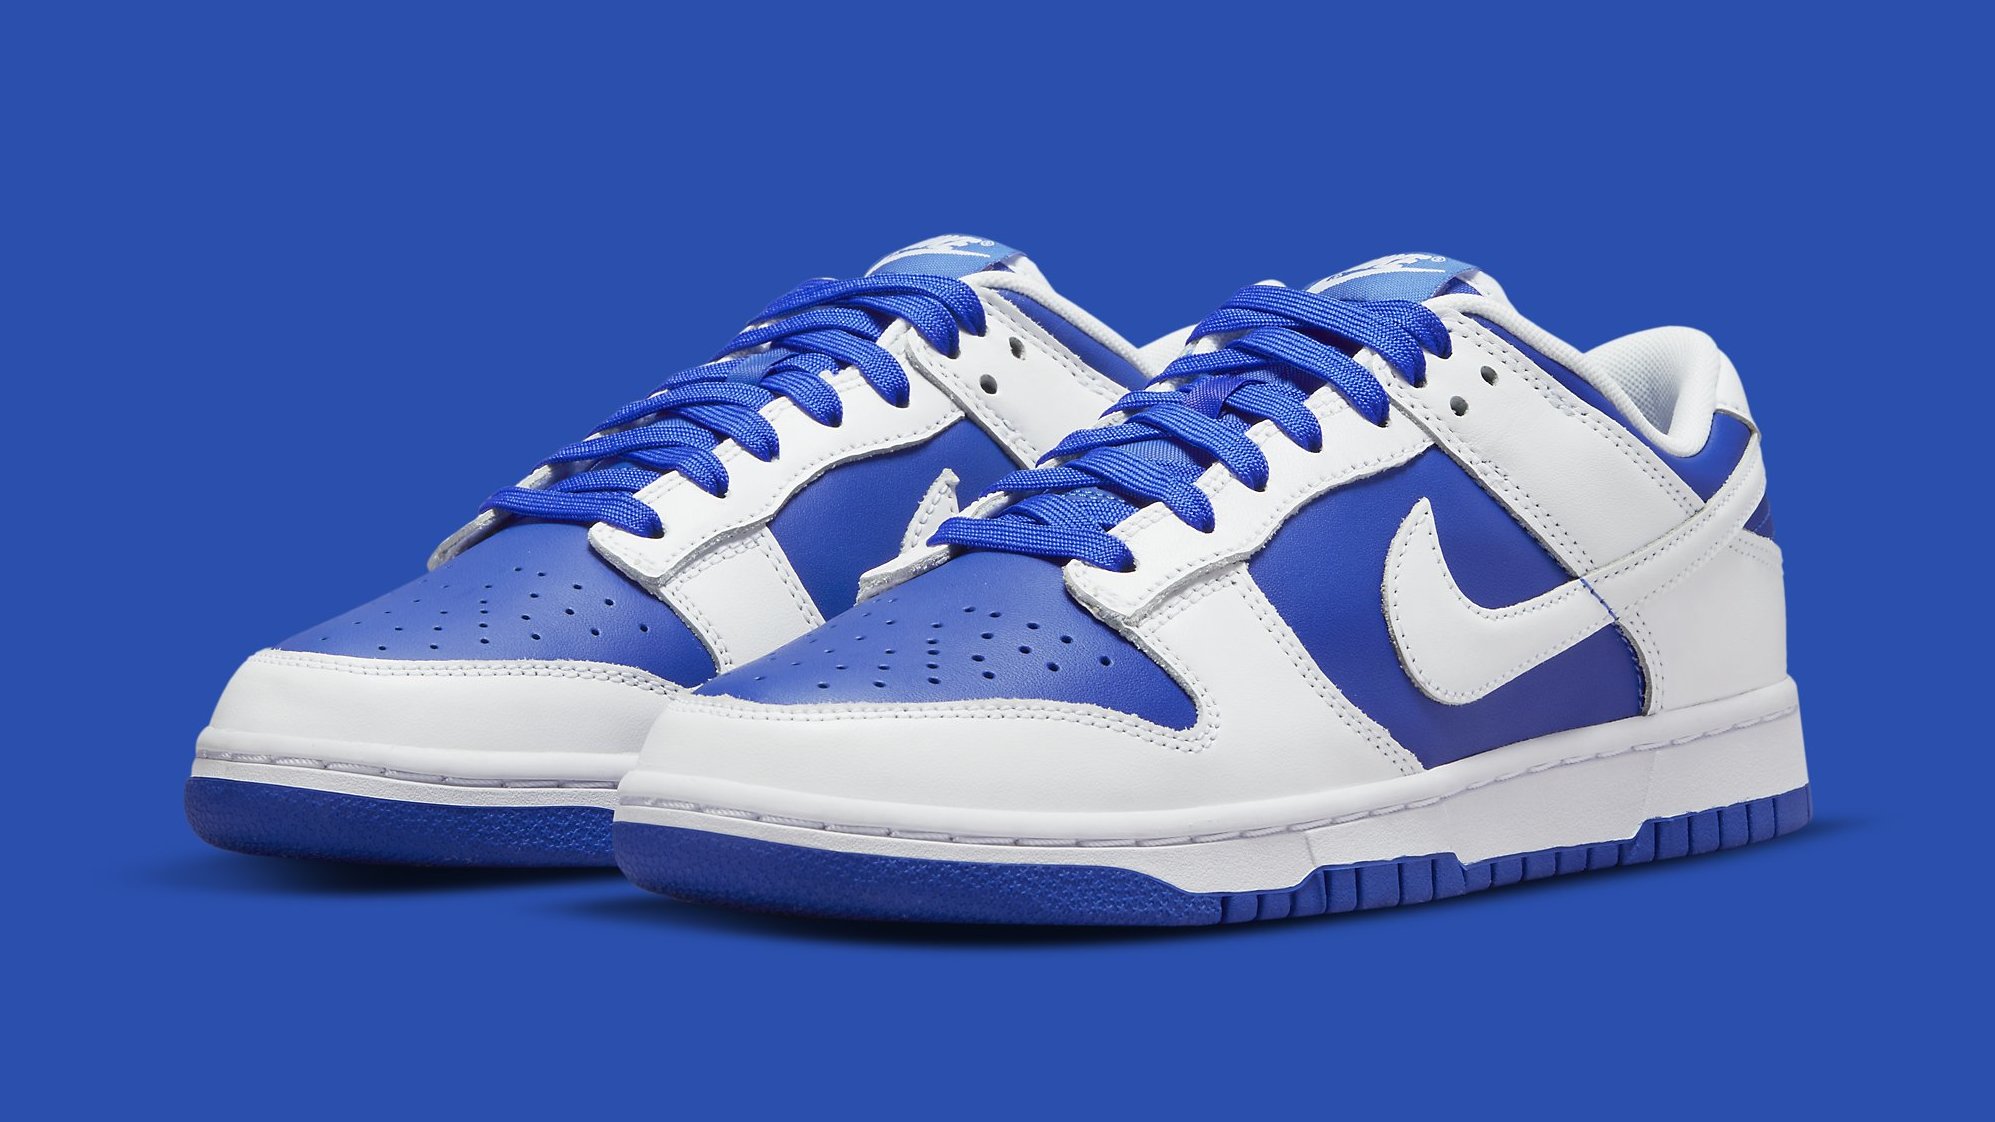 Best Look Yet at the 'Reverse Kentucky' Nike Dunks | Complex